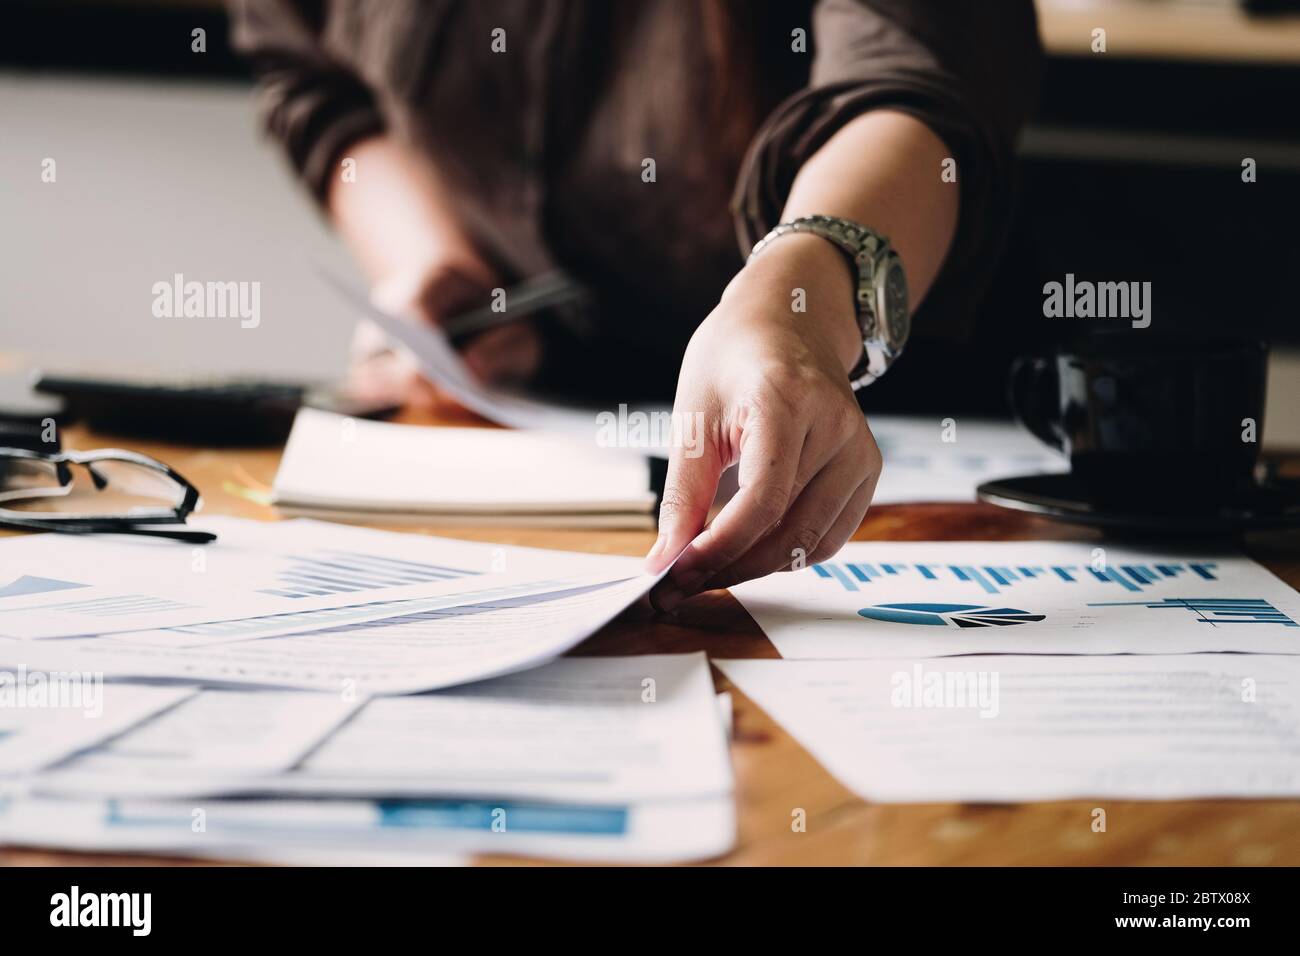 Business woman investment consultant analyzing company annual financial report Stock Photo